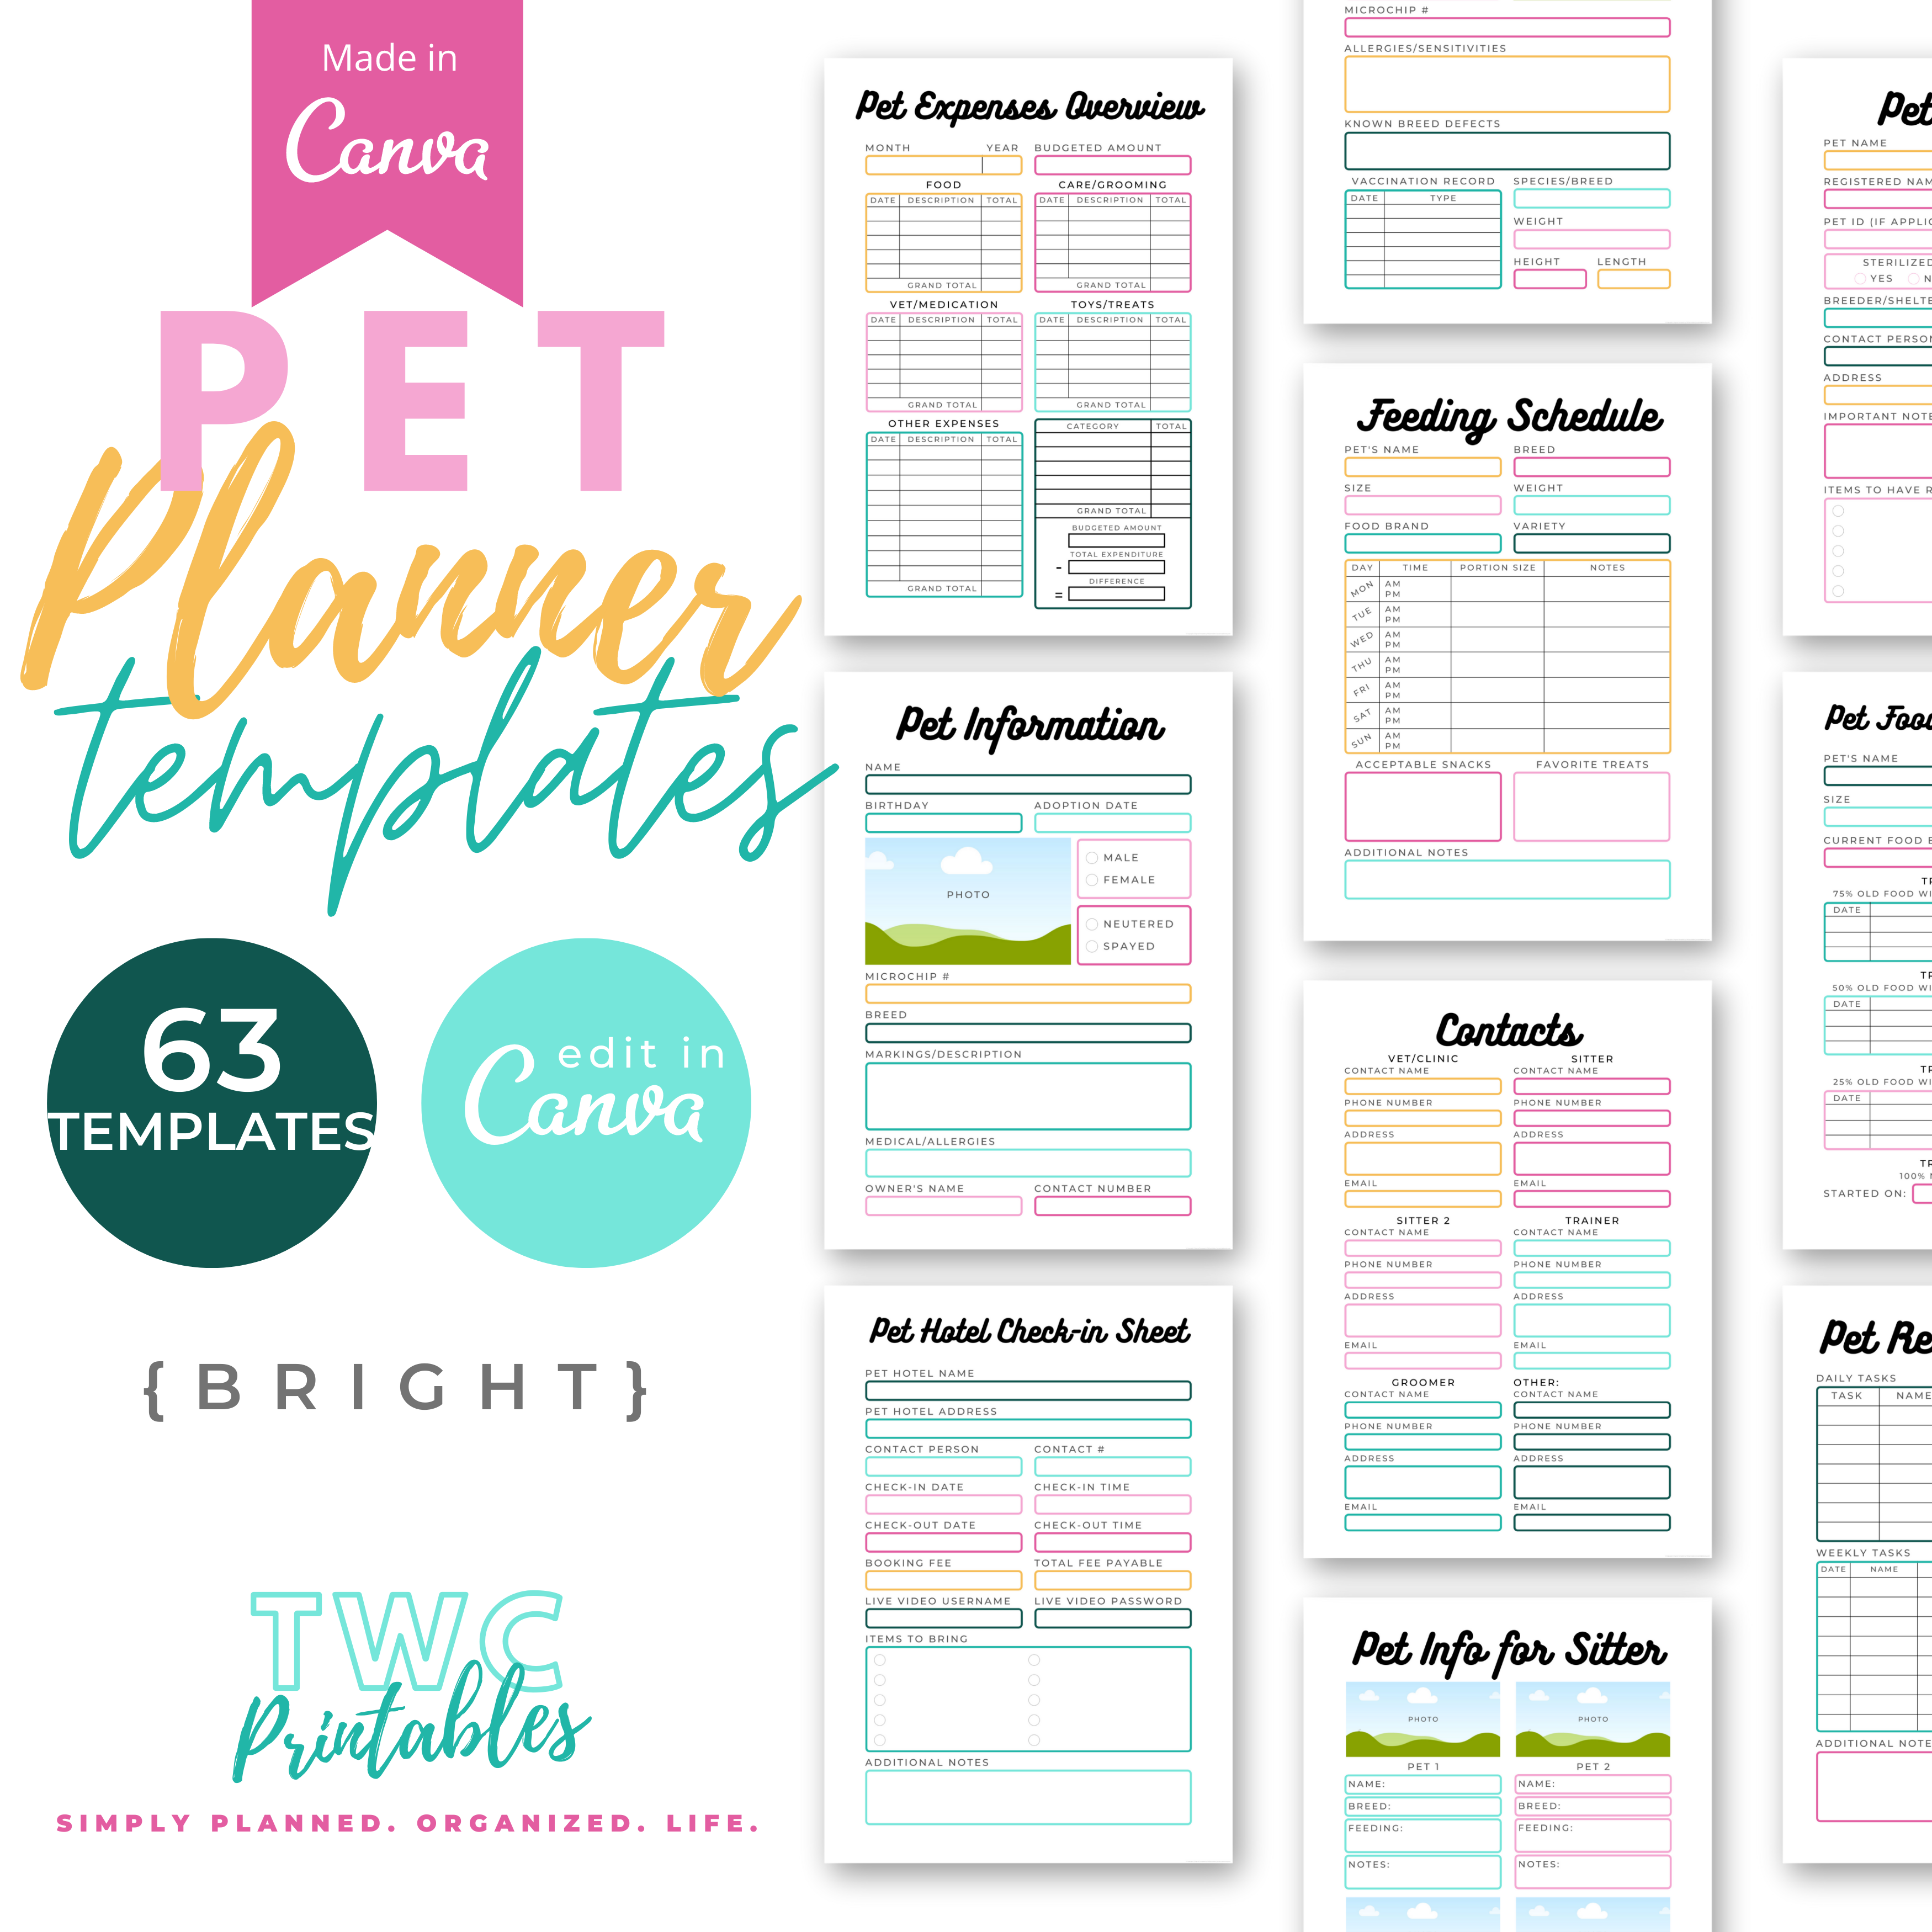 The editable pet planner templates for Canva will help you to create your own pet planner printable, or various pages for your pet organizer! Make your own pet care planner or puppy planner with this Canva kit! The planner is also great as pet owner gifts. It comes in a bright design, but you can change everything in these templates from fonts, colors, elements, shapes, layouts, and more! All you need is a free Canva account!